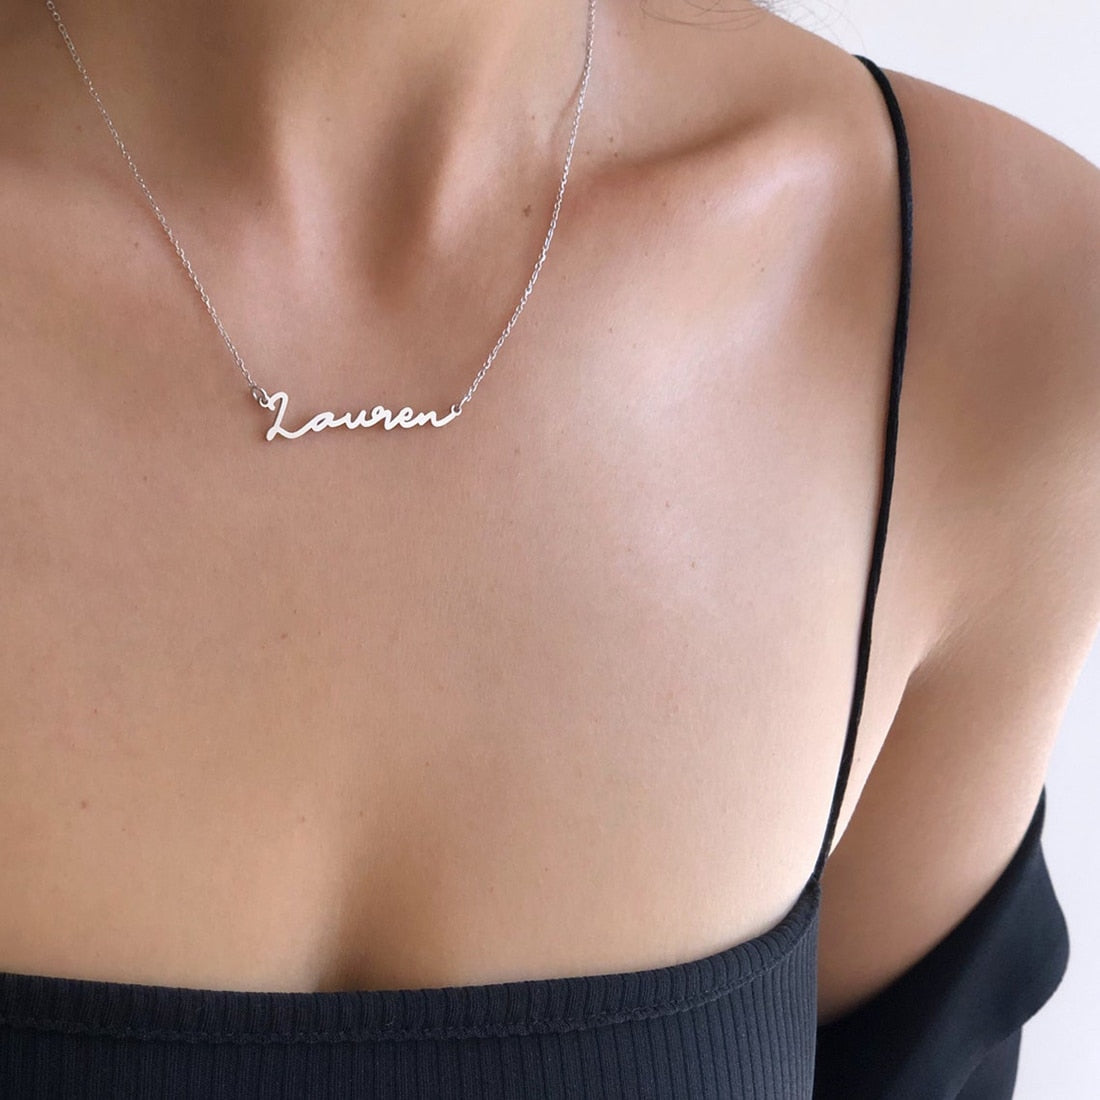 Custom Name Necklaces Stainless Steel Jewelry Woman Chain Personalized Name Pendant For Valentine&#39;s Day Gift